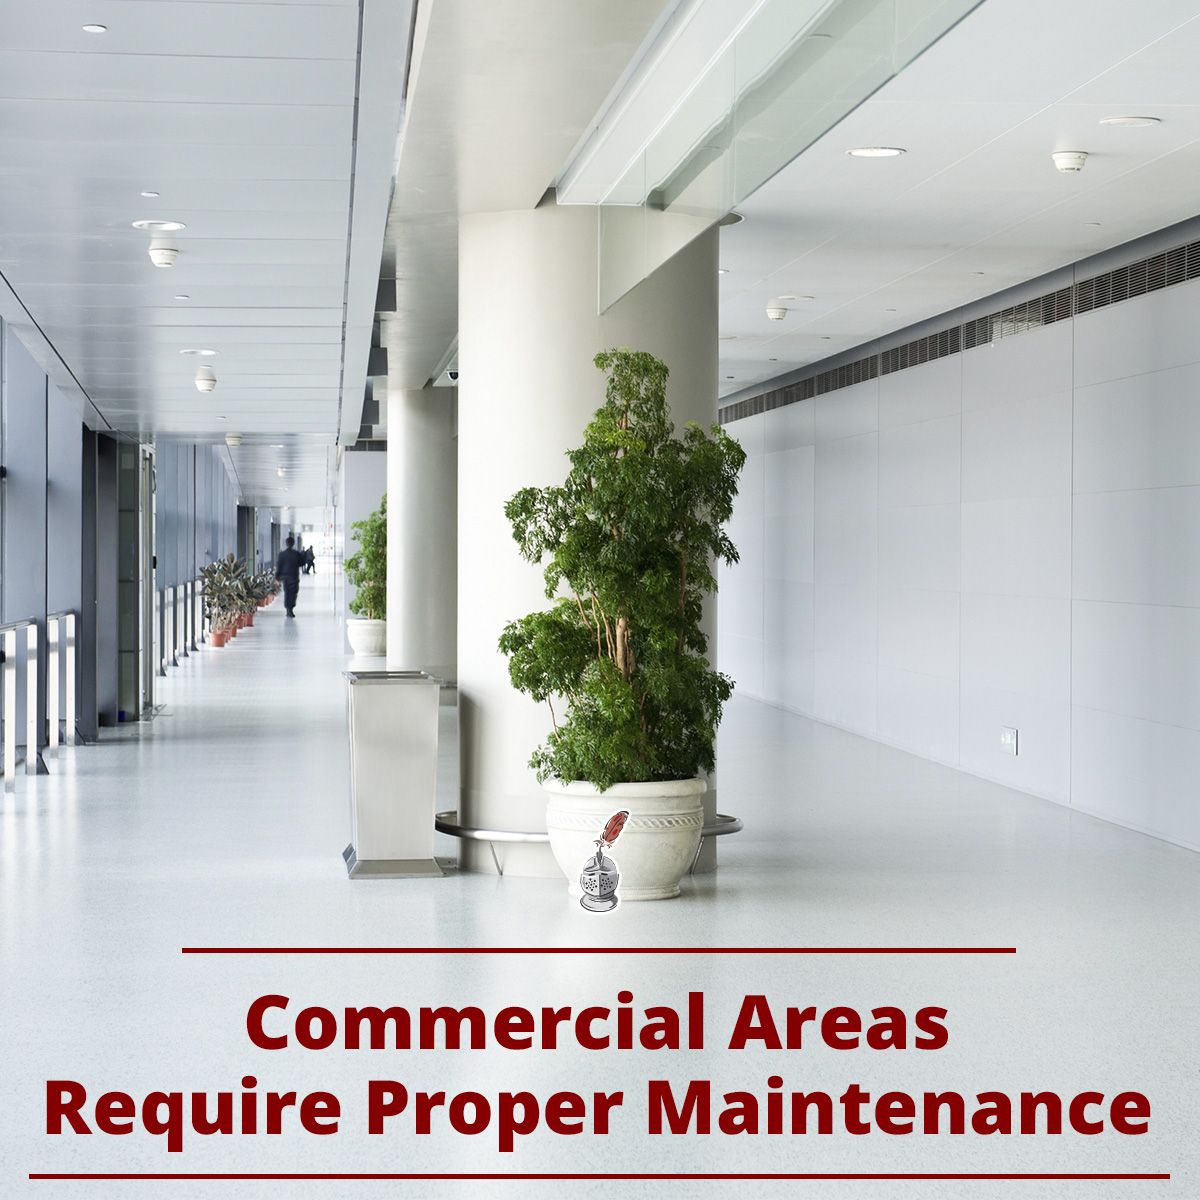 Commercial Areas Require Proper Maintenance